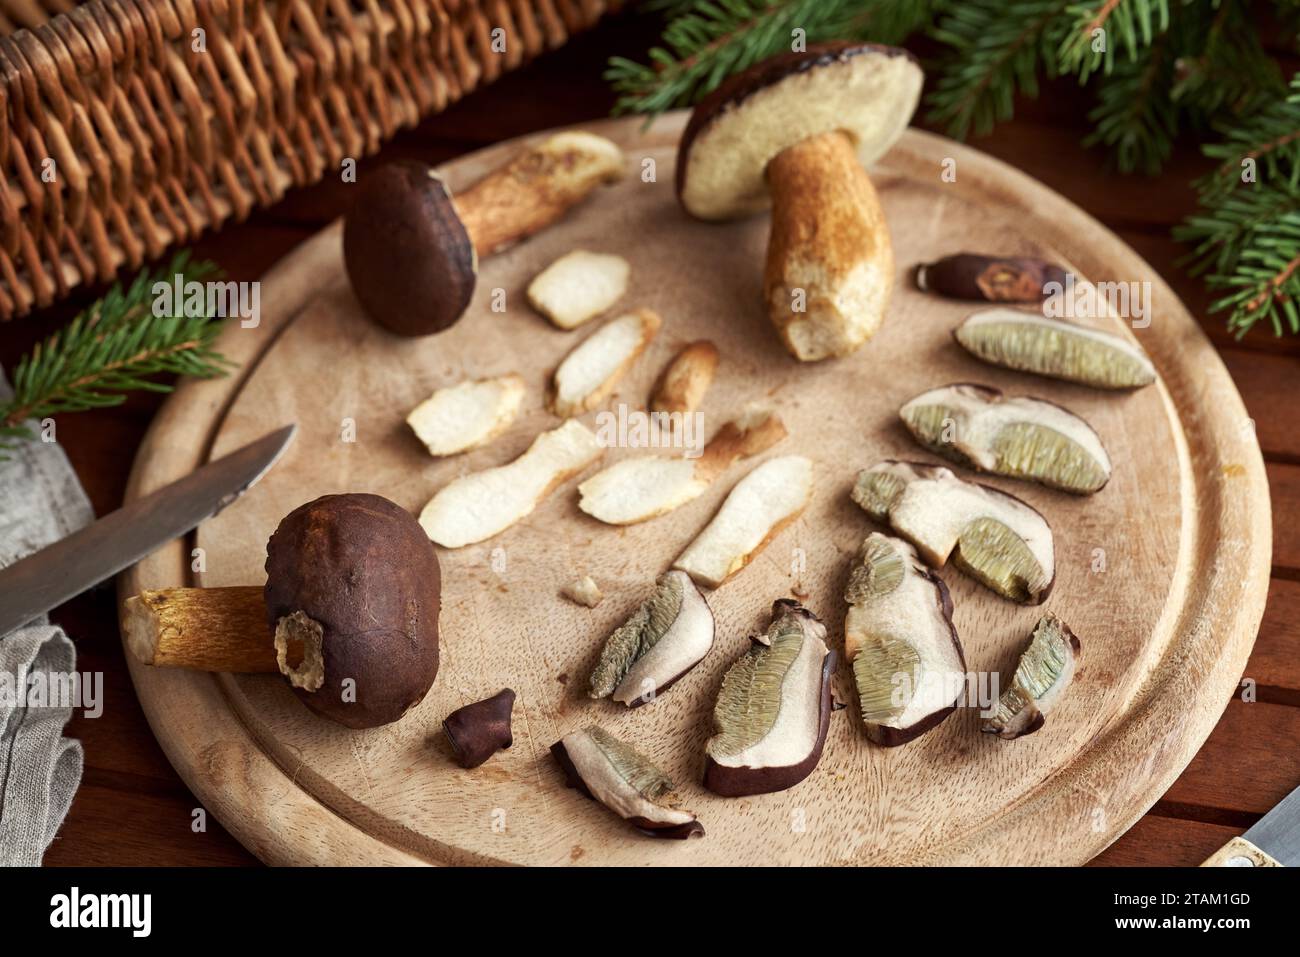 Whole and sliced fresh pine bolete mushrooms on a wooden table Stock Photo